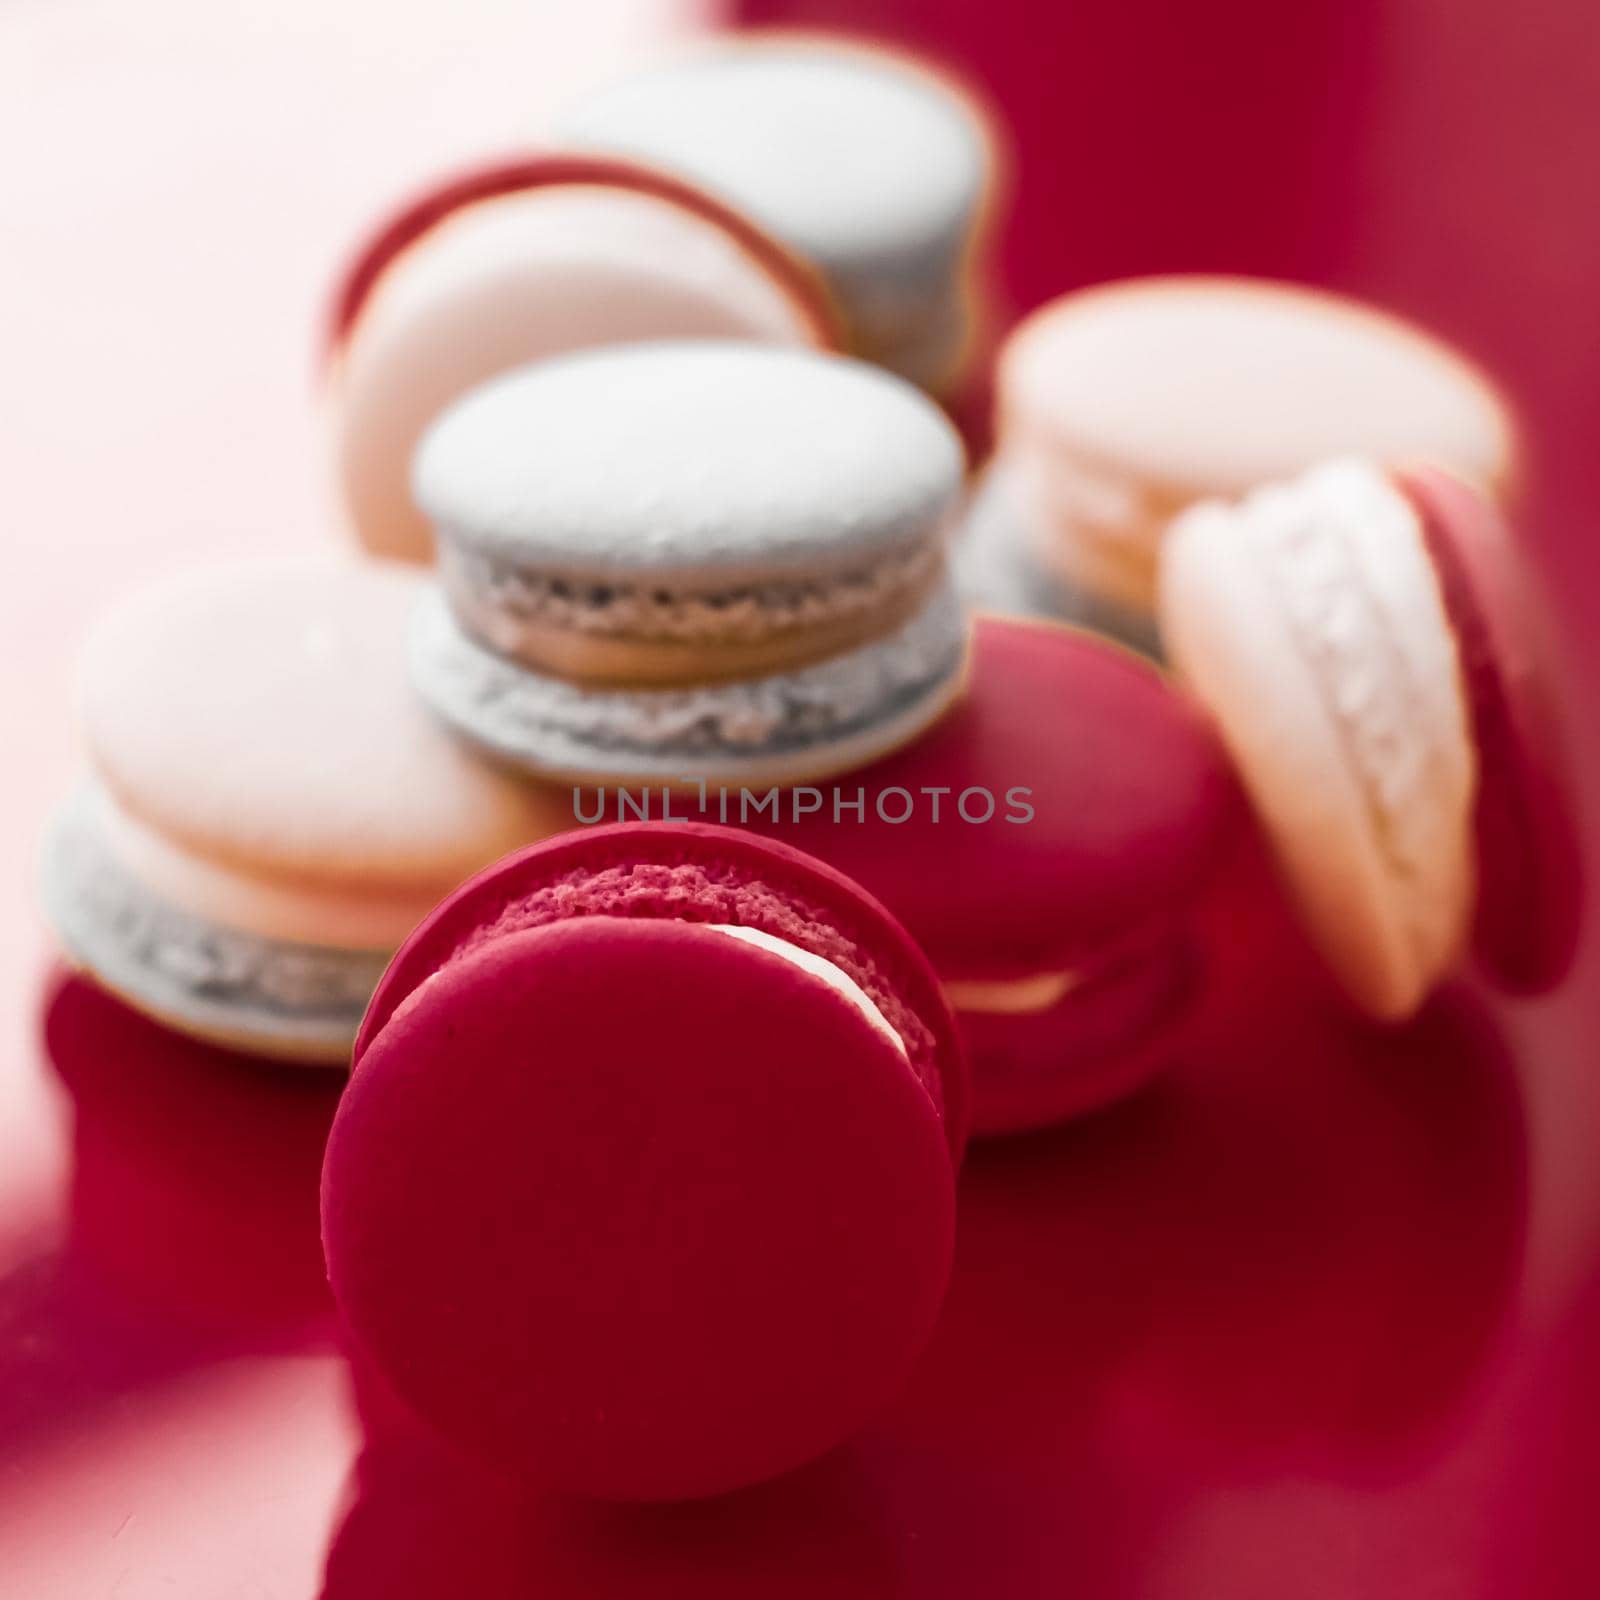 Pastry, bakery and branding concept - French macaroons on wine red background, parisian chic cafe dessert, sweet food and cake macaron for luxury confectionery brand, holiday backdrop design